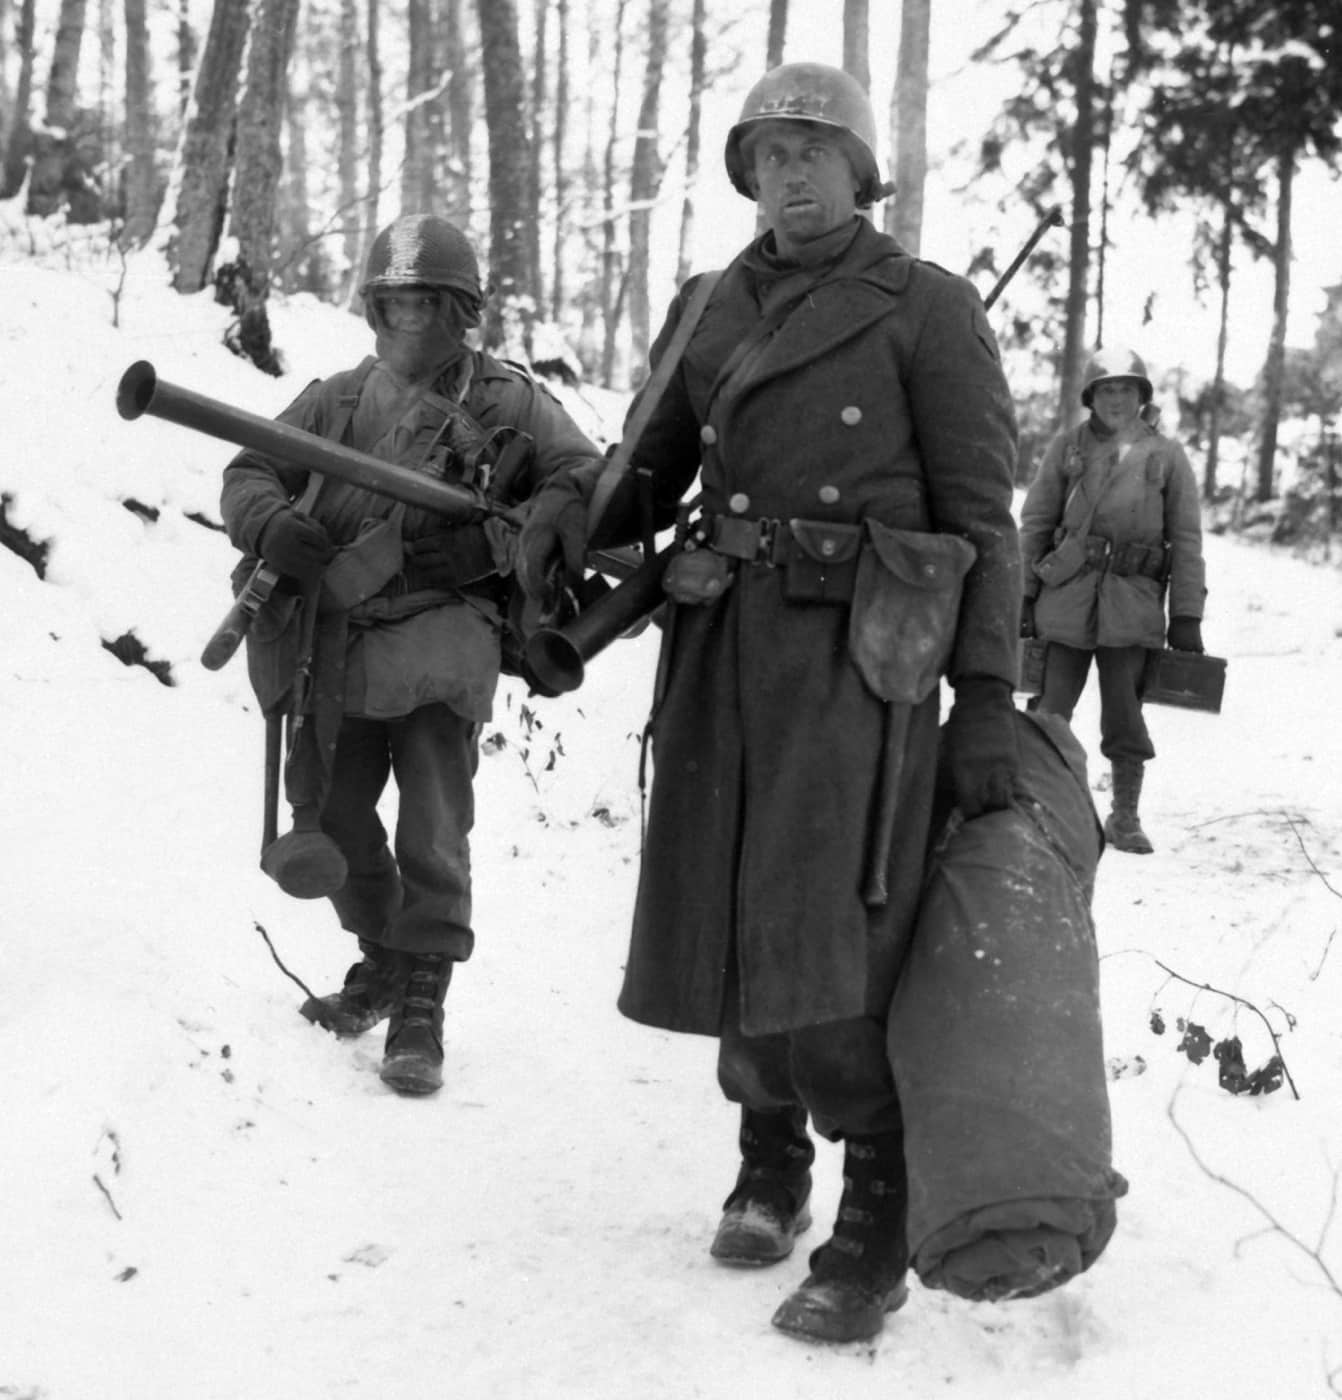 bazookas in the snow during the battle of the bulge